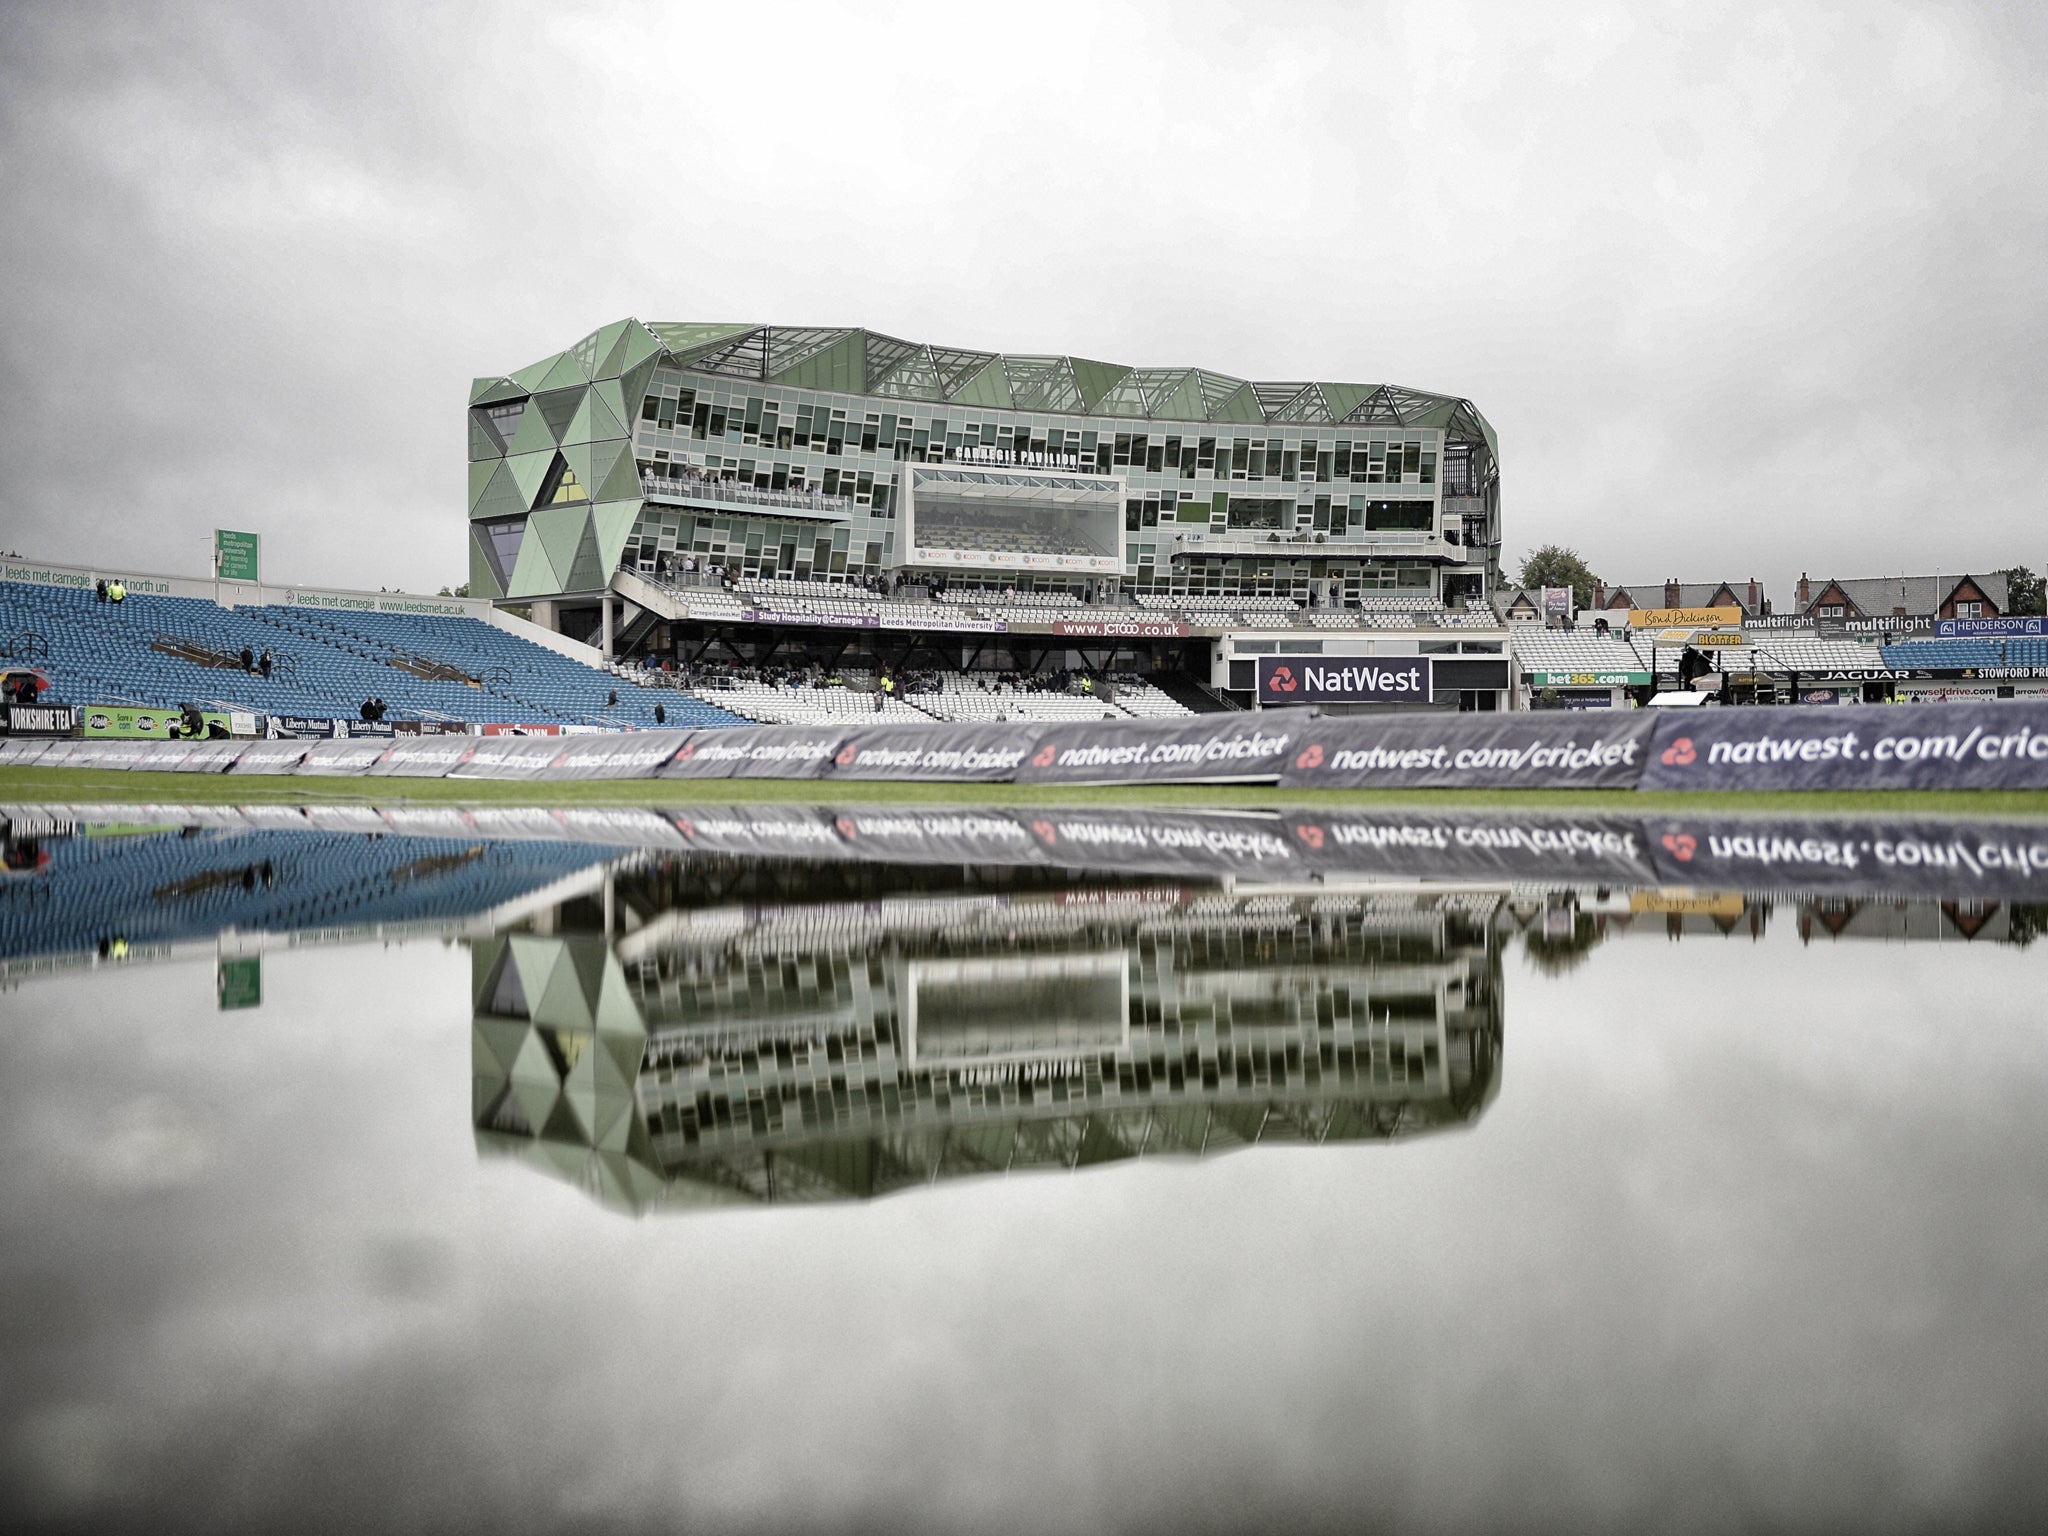 The first ODI between England and Australia has been called off due to rain at Headingley